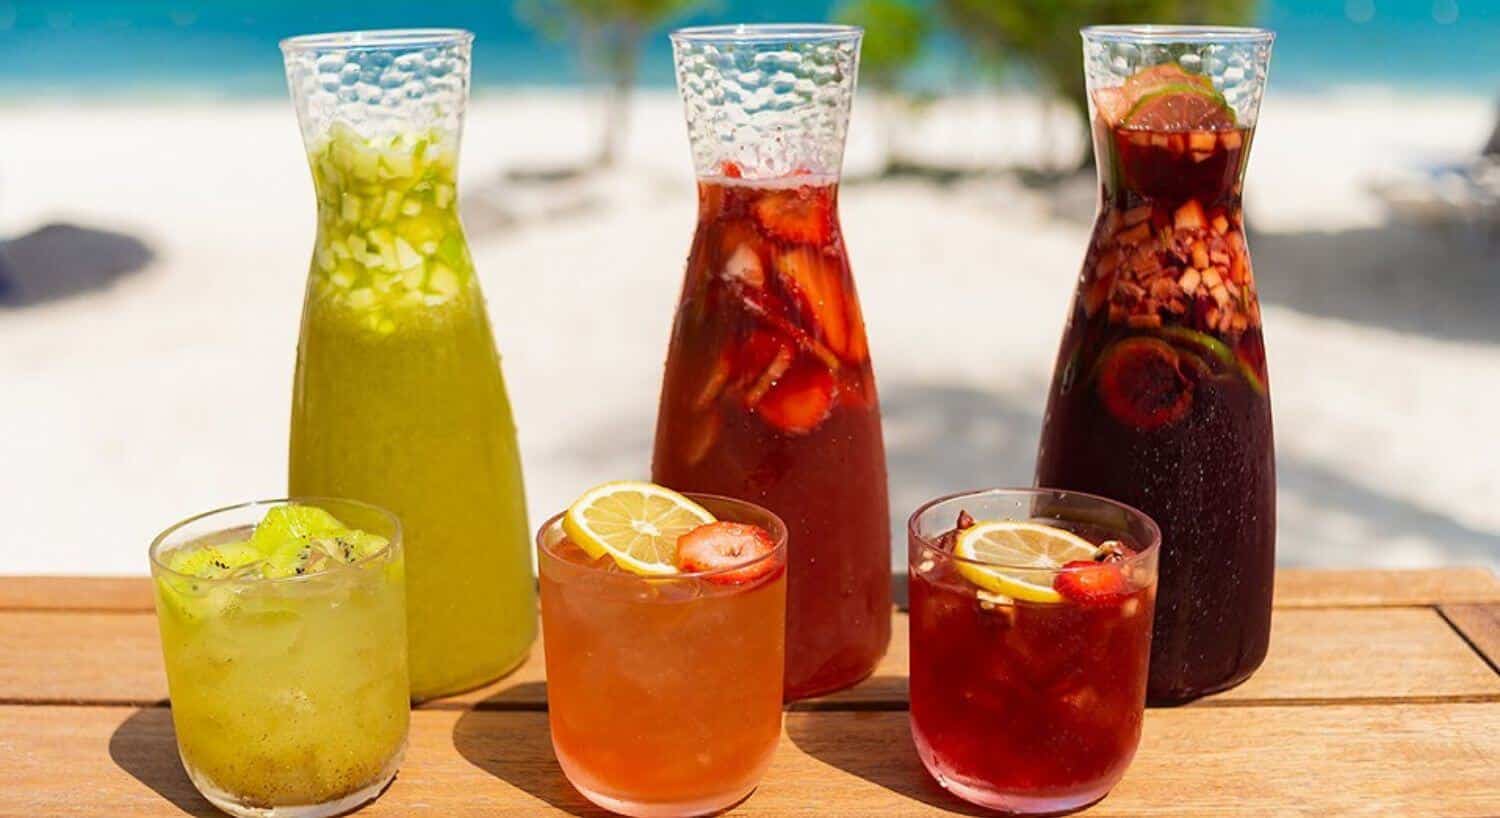 Three carafes and three glasses of various fruit sangrias in yellow, red, and purple.